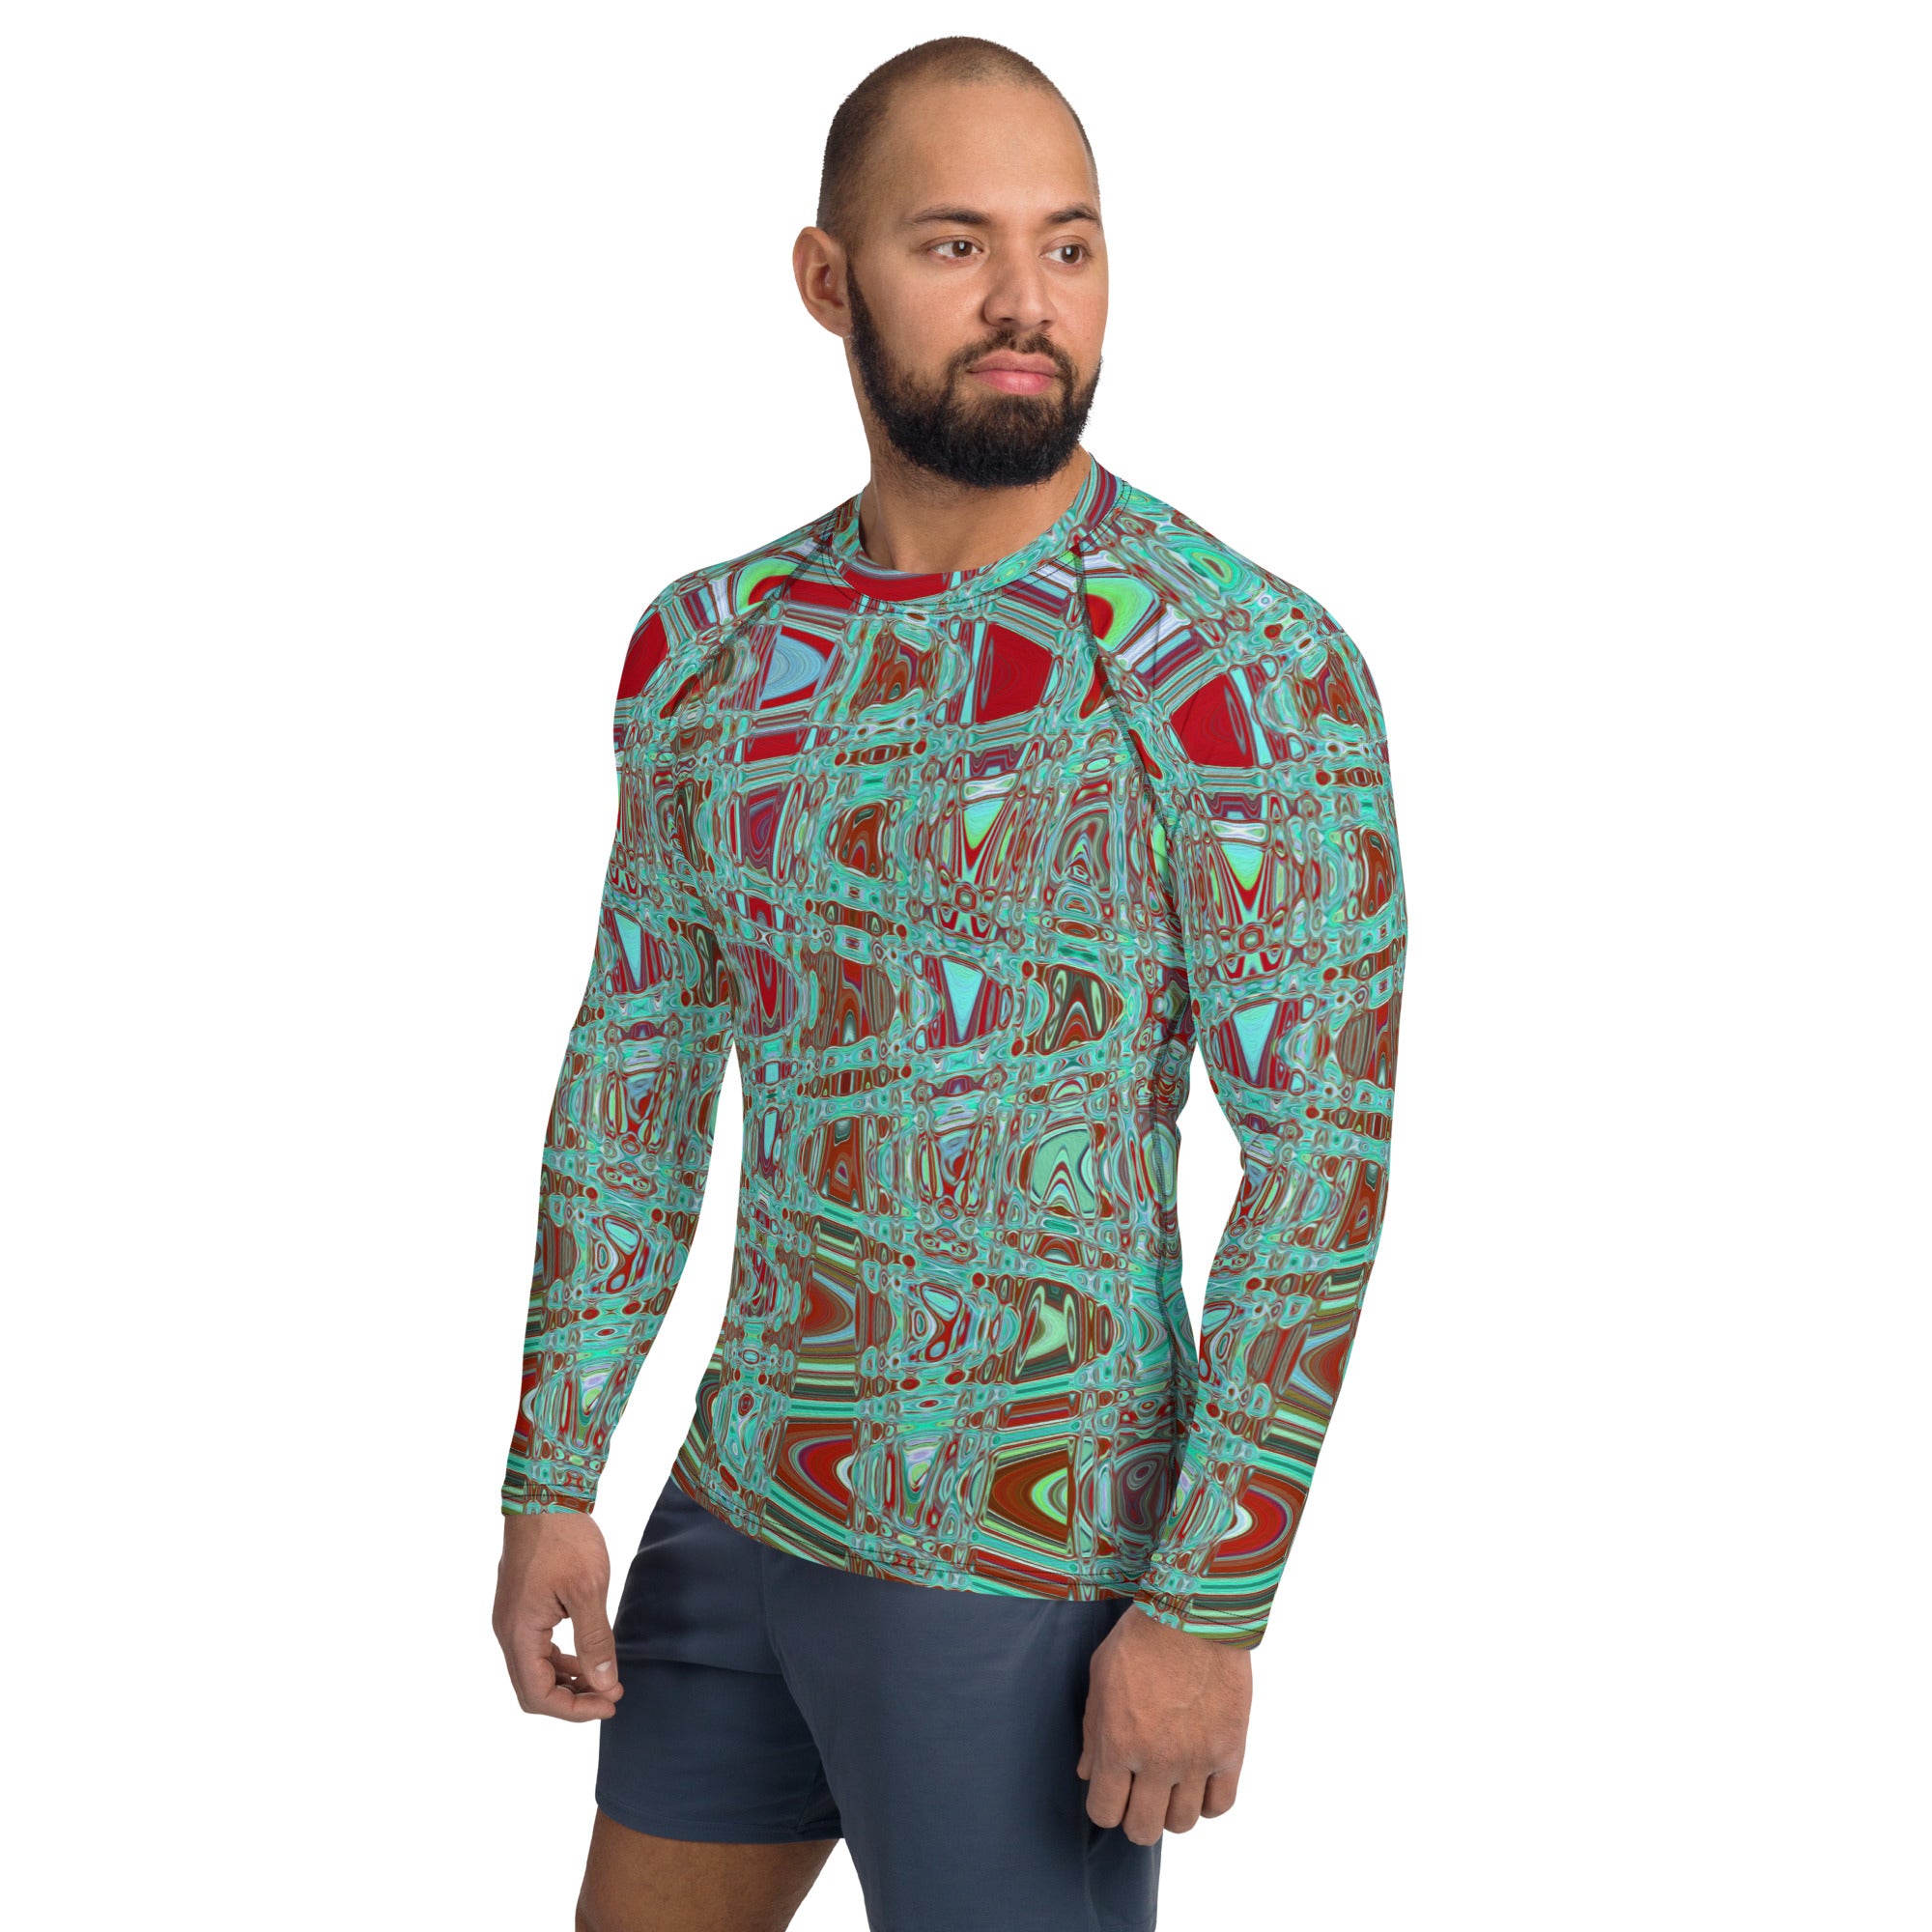 Men's Rash Guard Athletic Shirts | Cool Abstract Blue and Red Retro Zigzag Waves